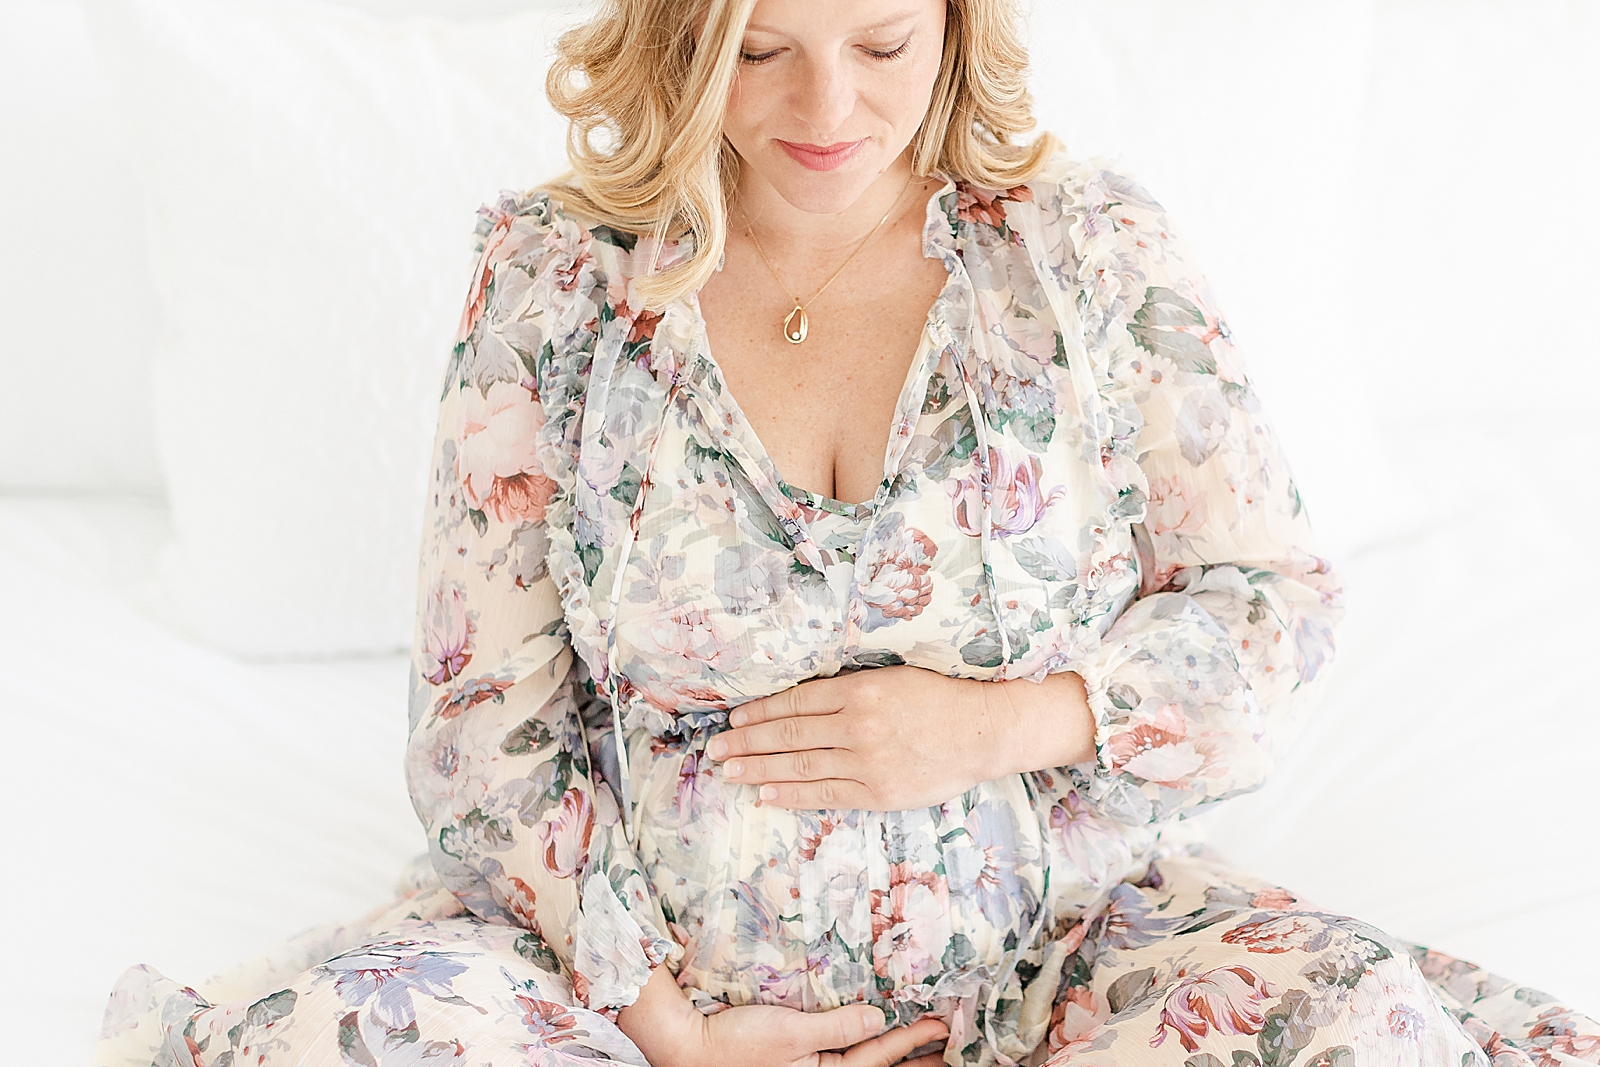 pregnant woman sitting on bed holding belly looking down at her baby wearing floral dress